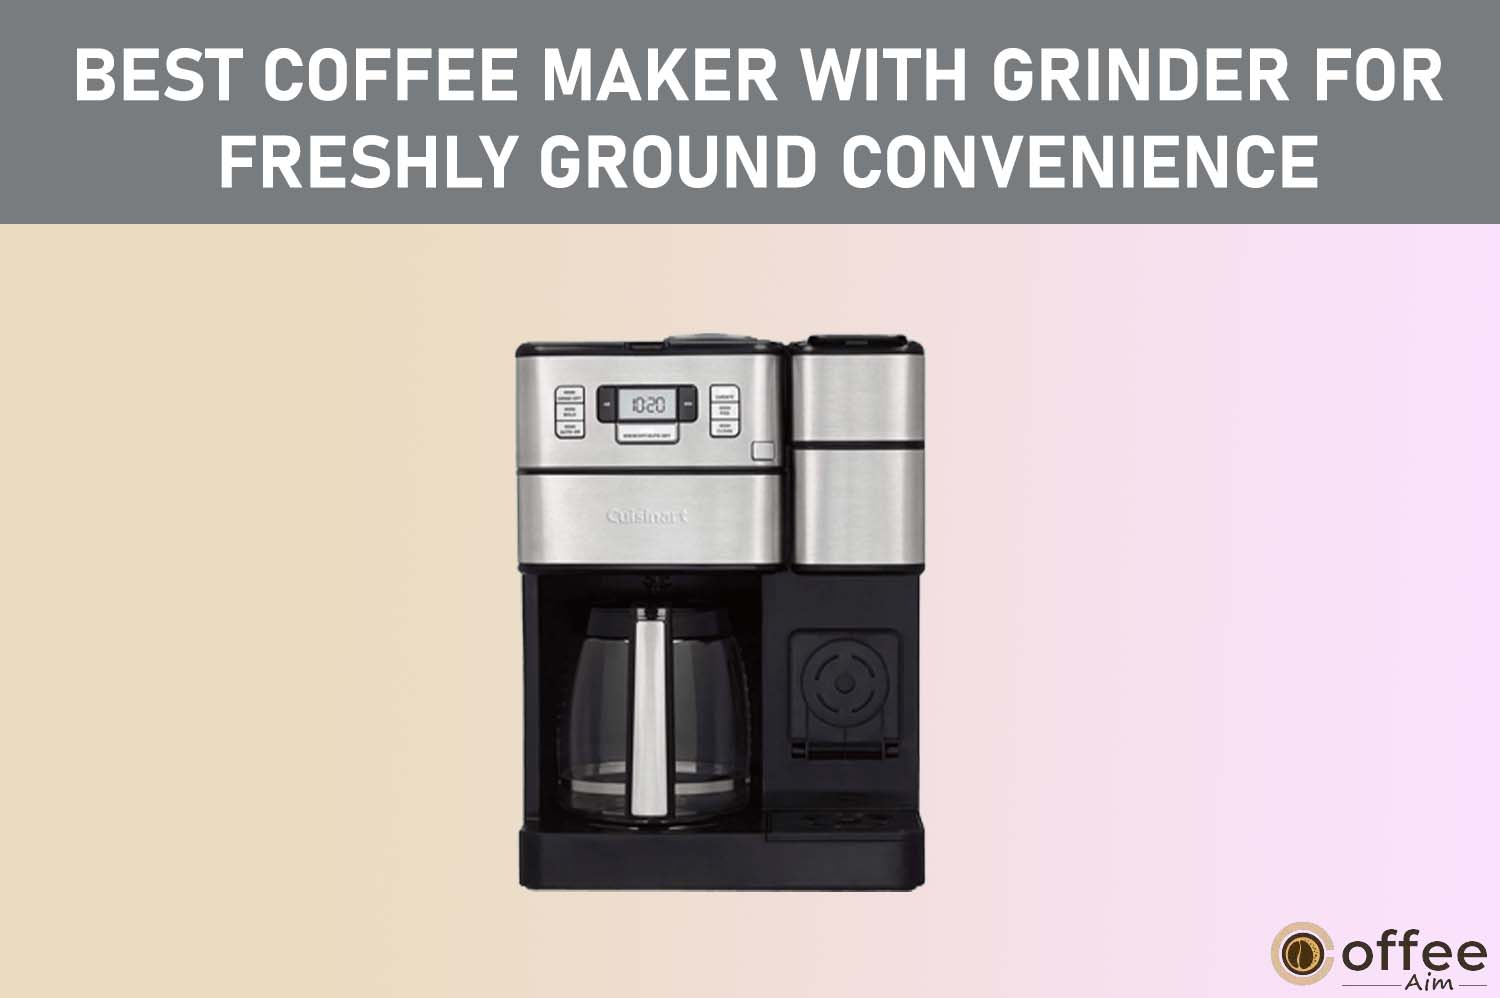 Featured image for the article "Best Coffee Maker With Grinder For Freshly Ground Convenience"